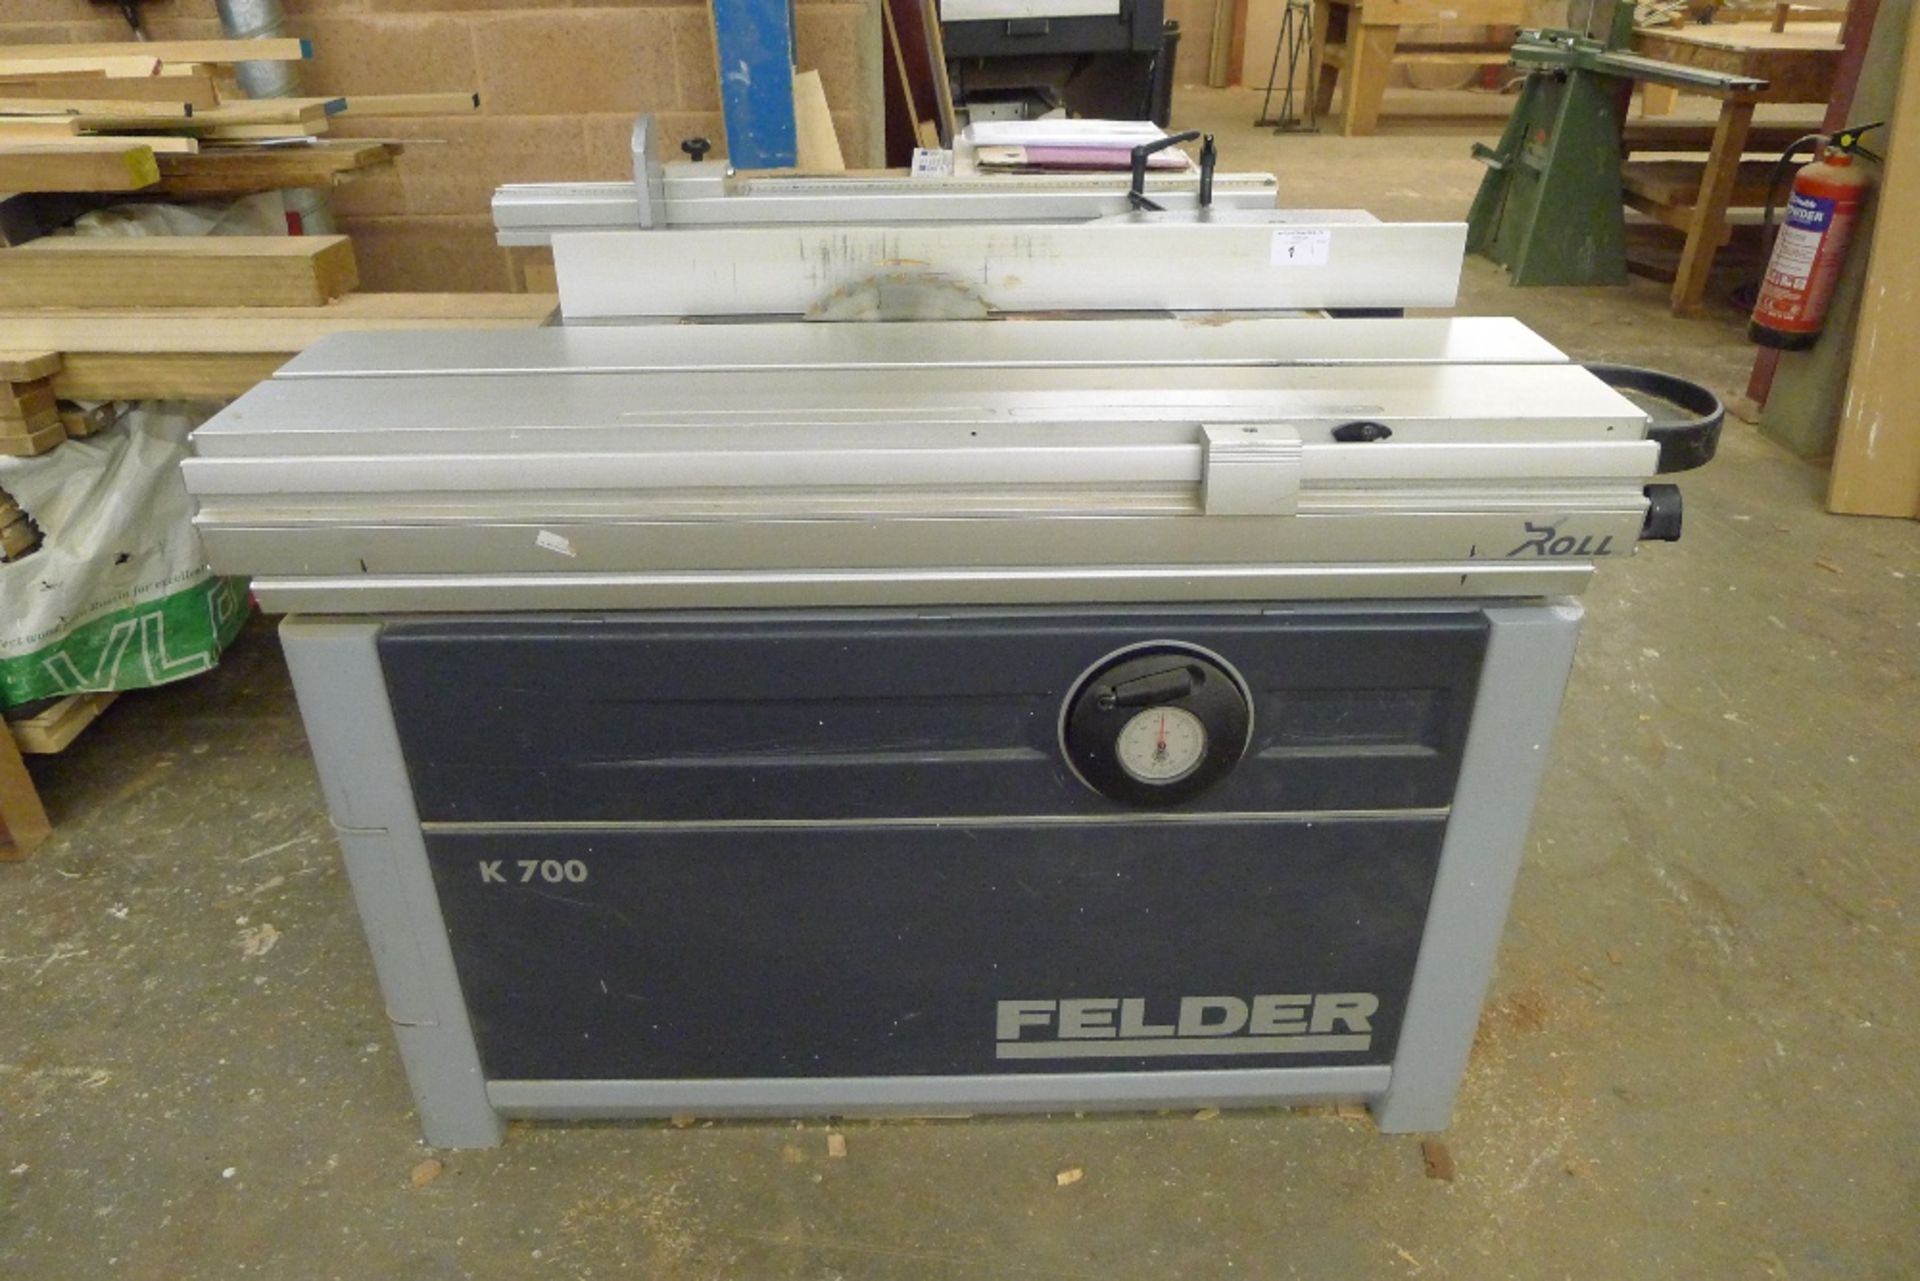 1 sliding panel table saw by Felder type K-700, YOM 2015, 3ph with 1 blade fitted, supplied with 9